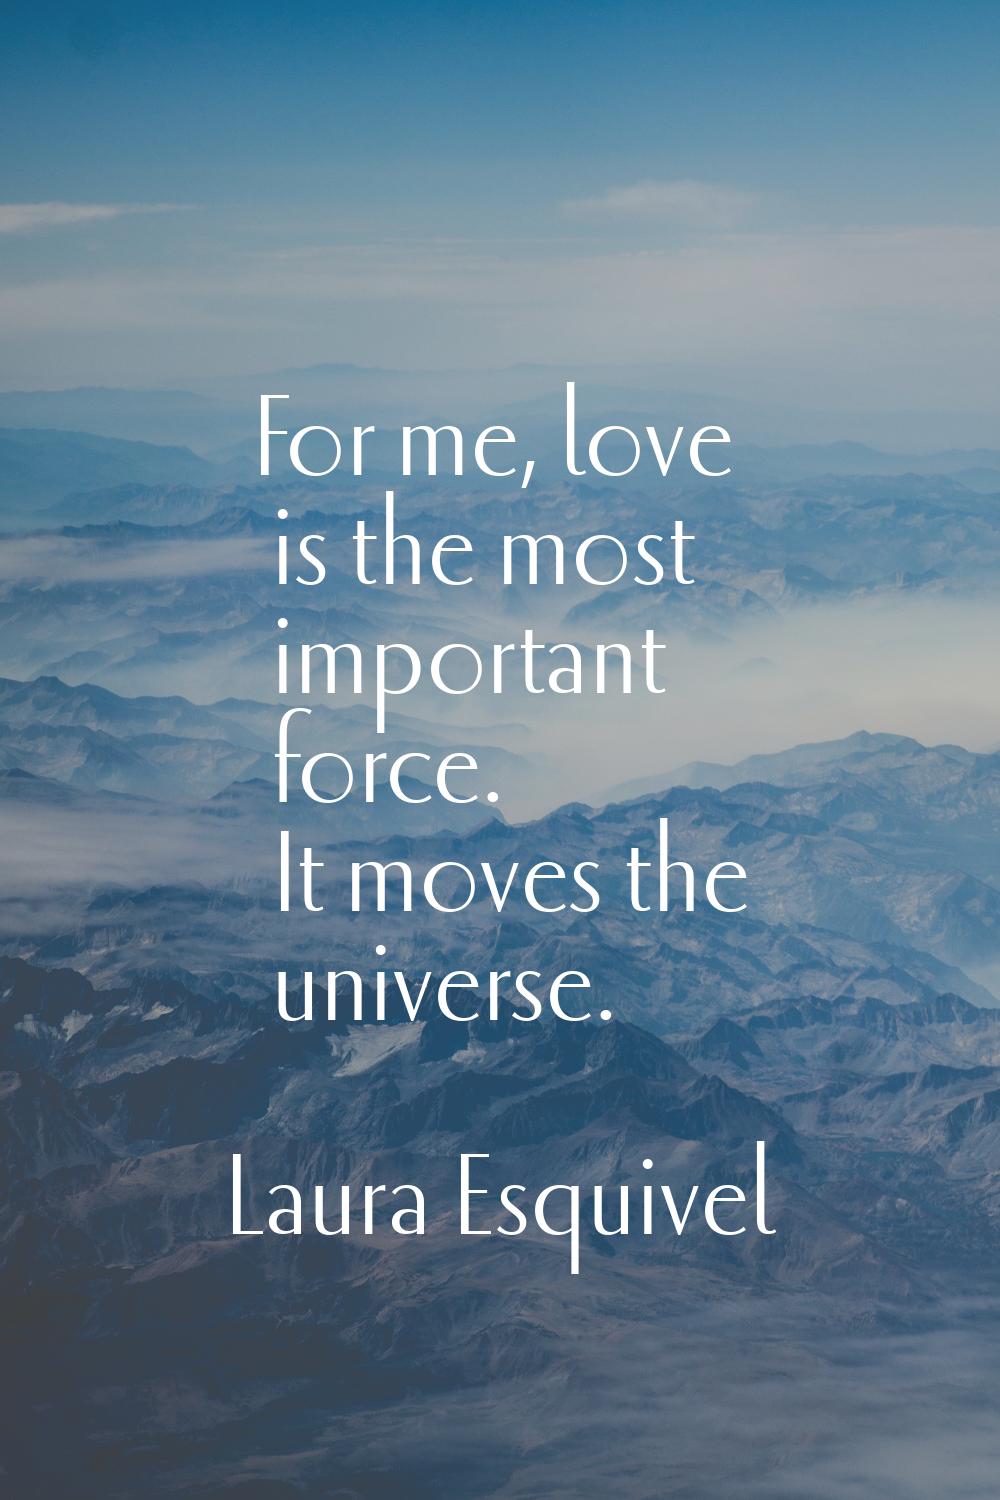 For me, love is the most important force. It moves the universe.